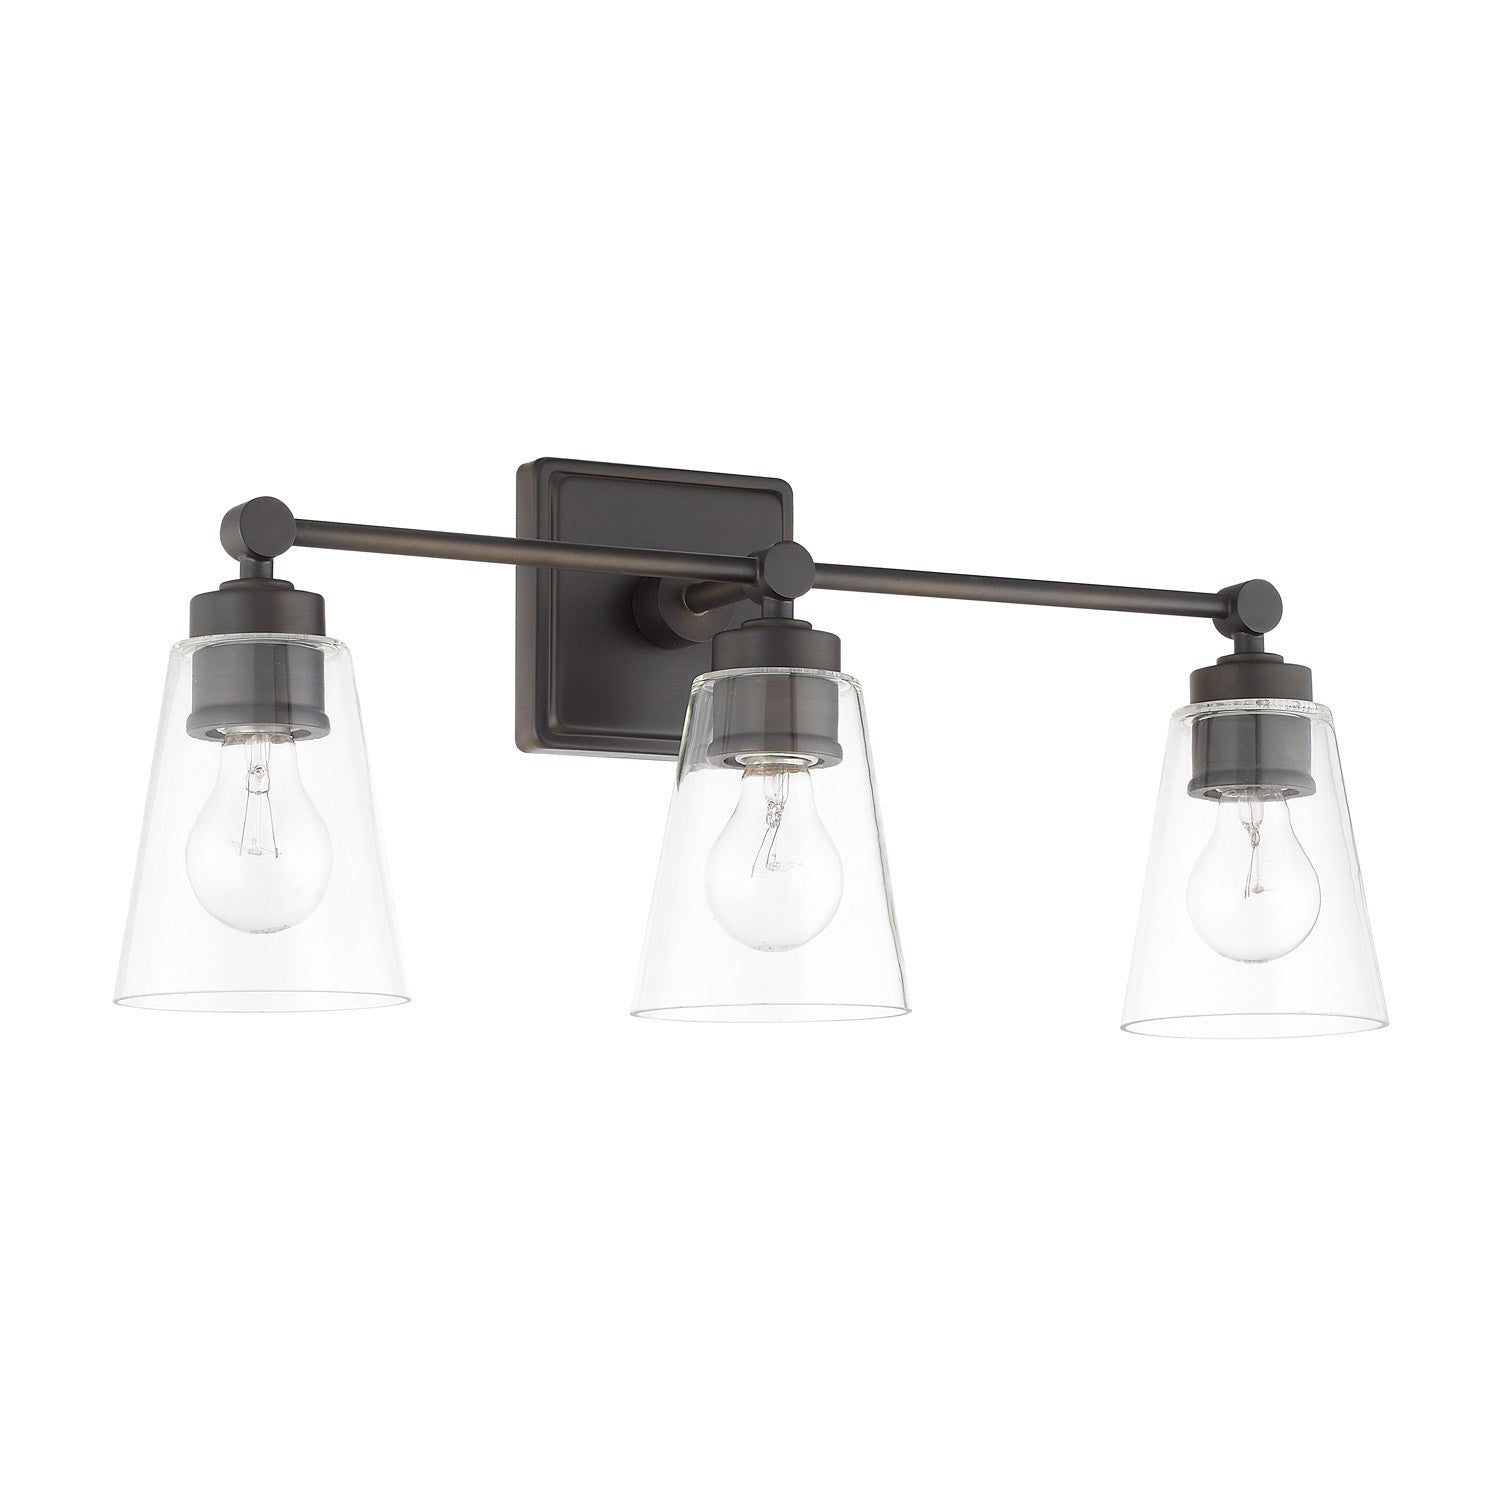 3 Light Enright Vanity in Olde Bronze with clear cone shaped glass shades by Capital Lighting 121831OB-432